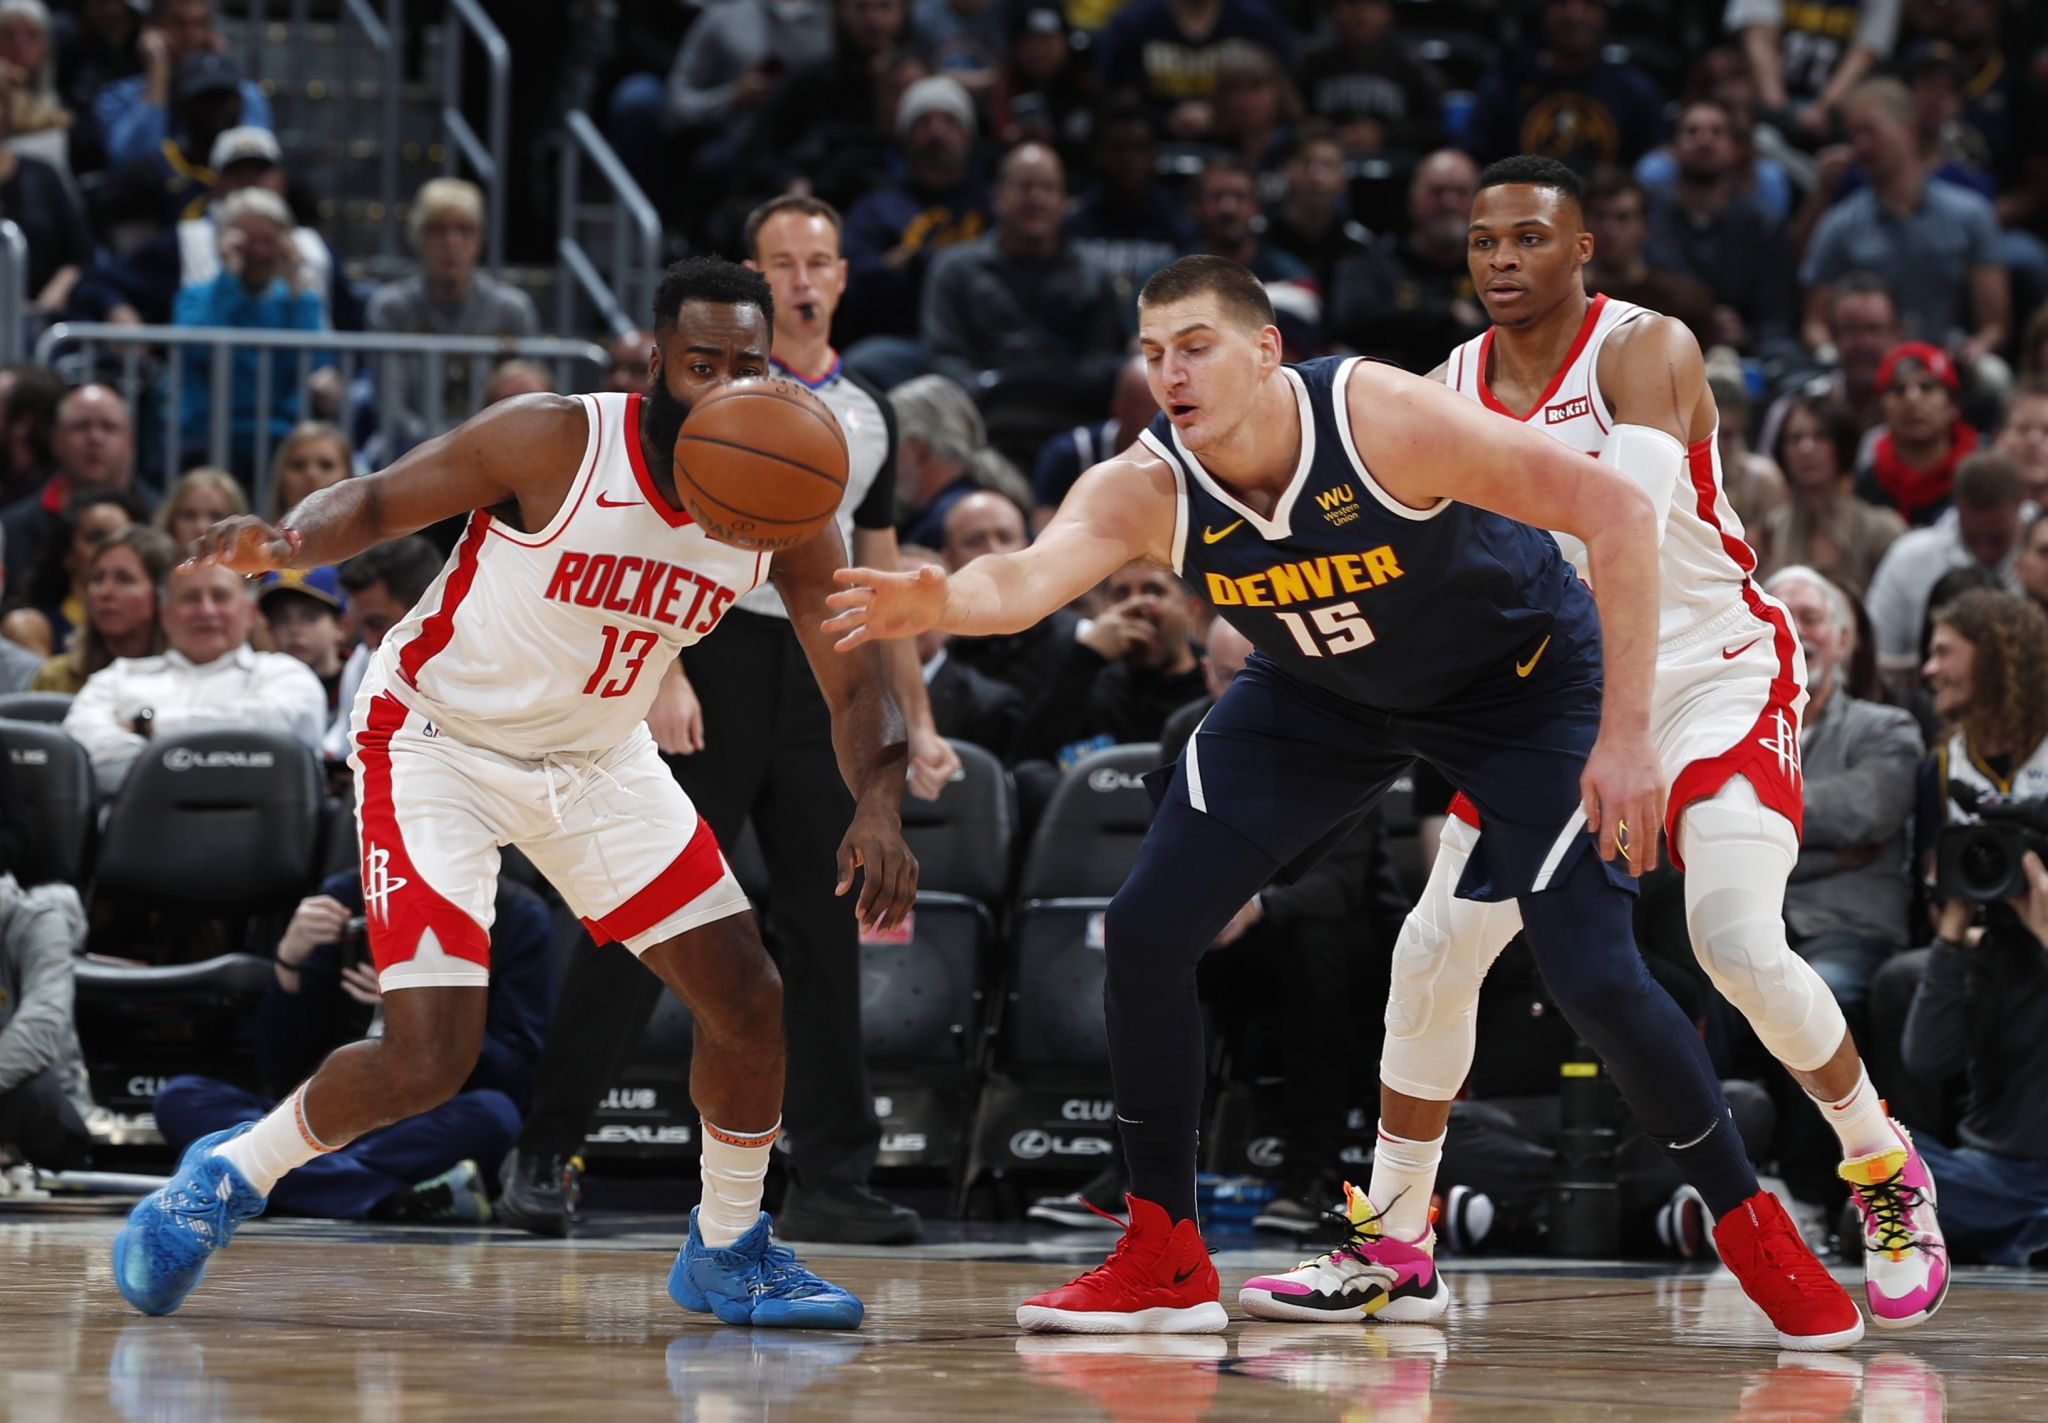 Scouting report: Rockets at Nuggets